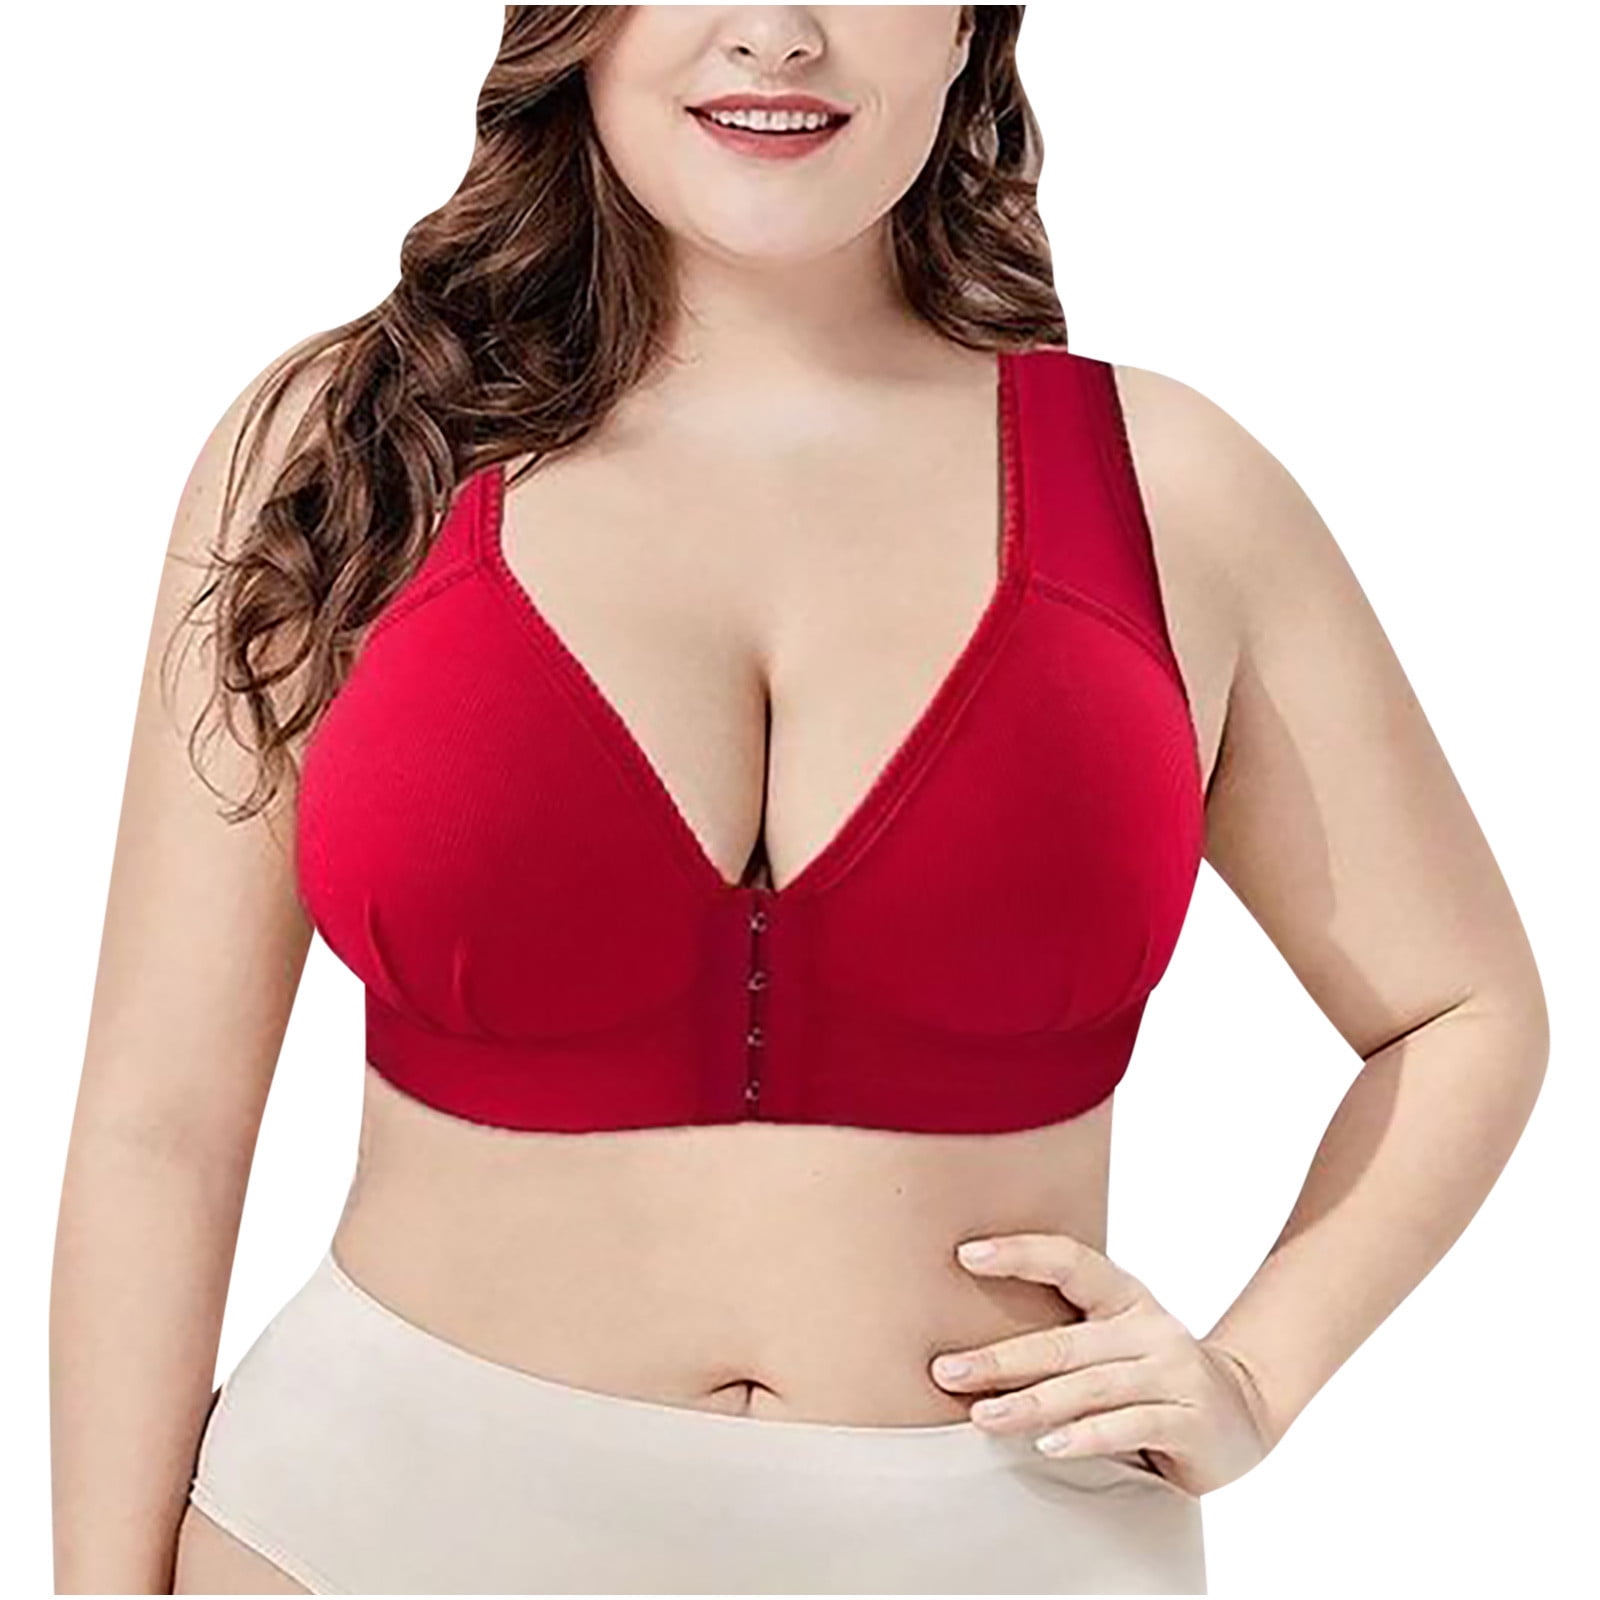 Qcmgmg Women's Comfort Full-Coverage Minimizer Bras Support Front